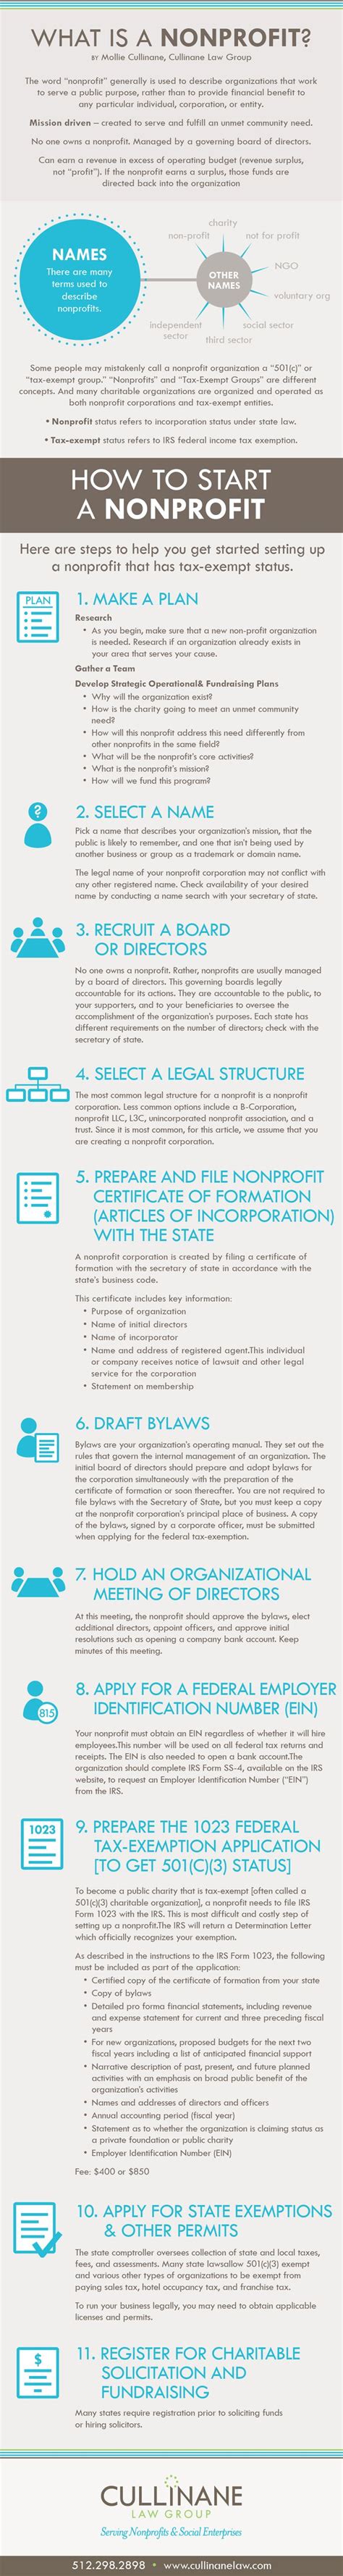 How To Set Up A Non Profit With 501 C 3 Status Nonprofit Startup